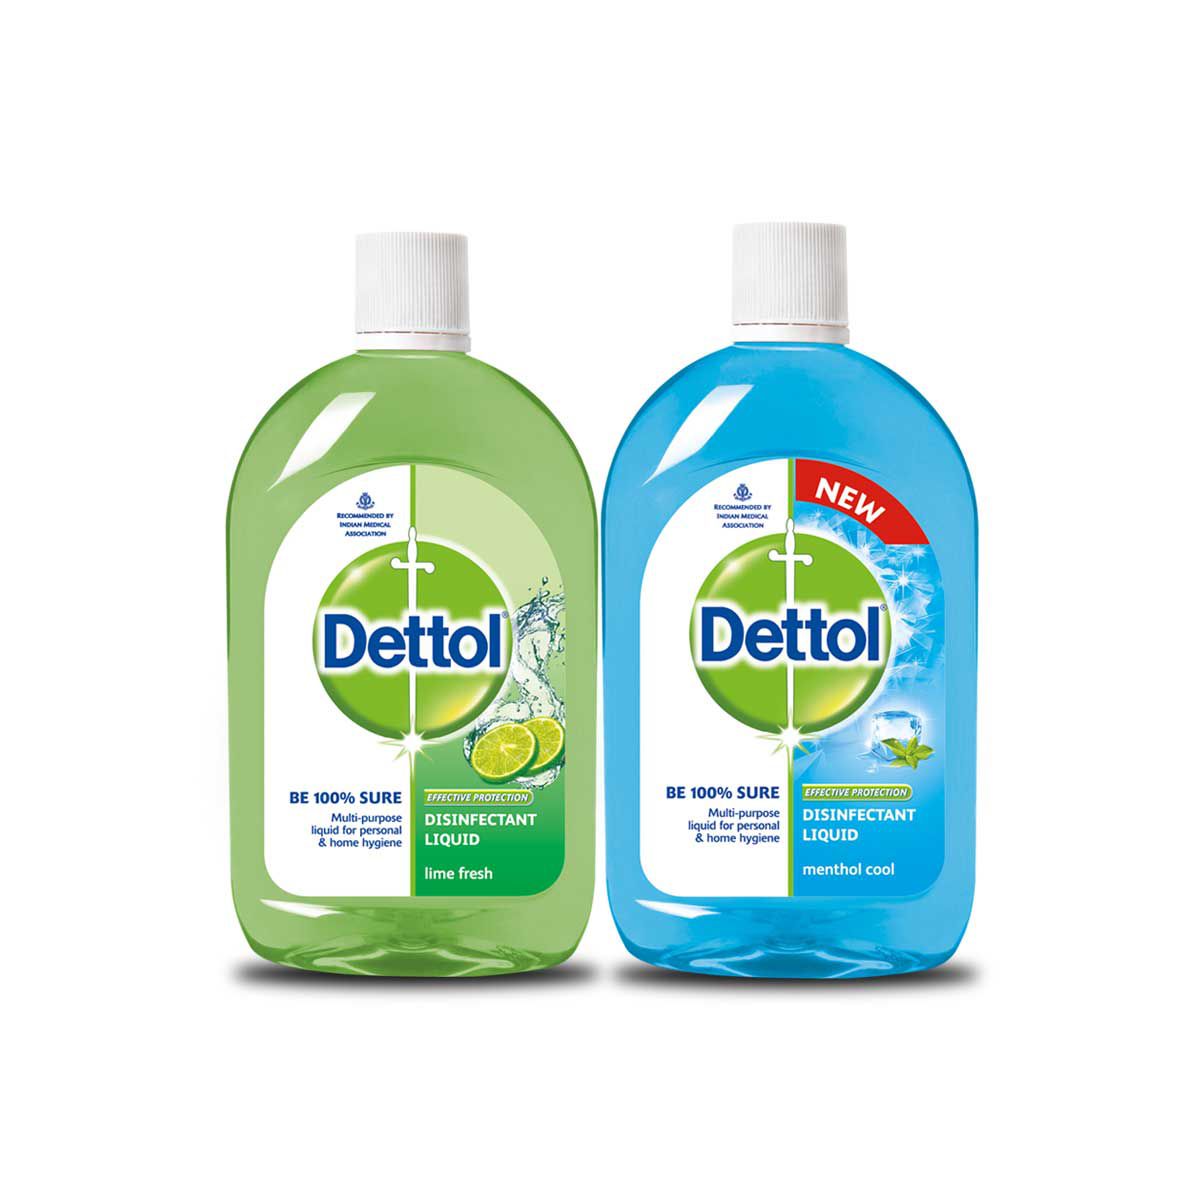 Dettol Cleaning Products